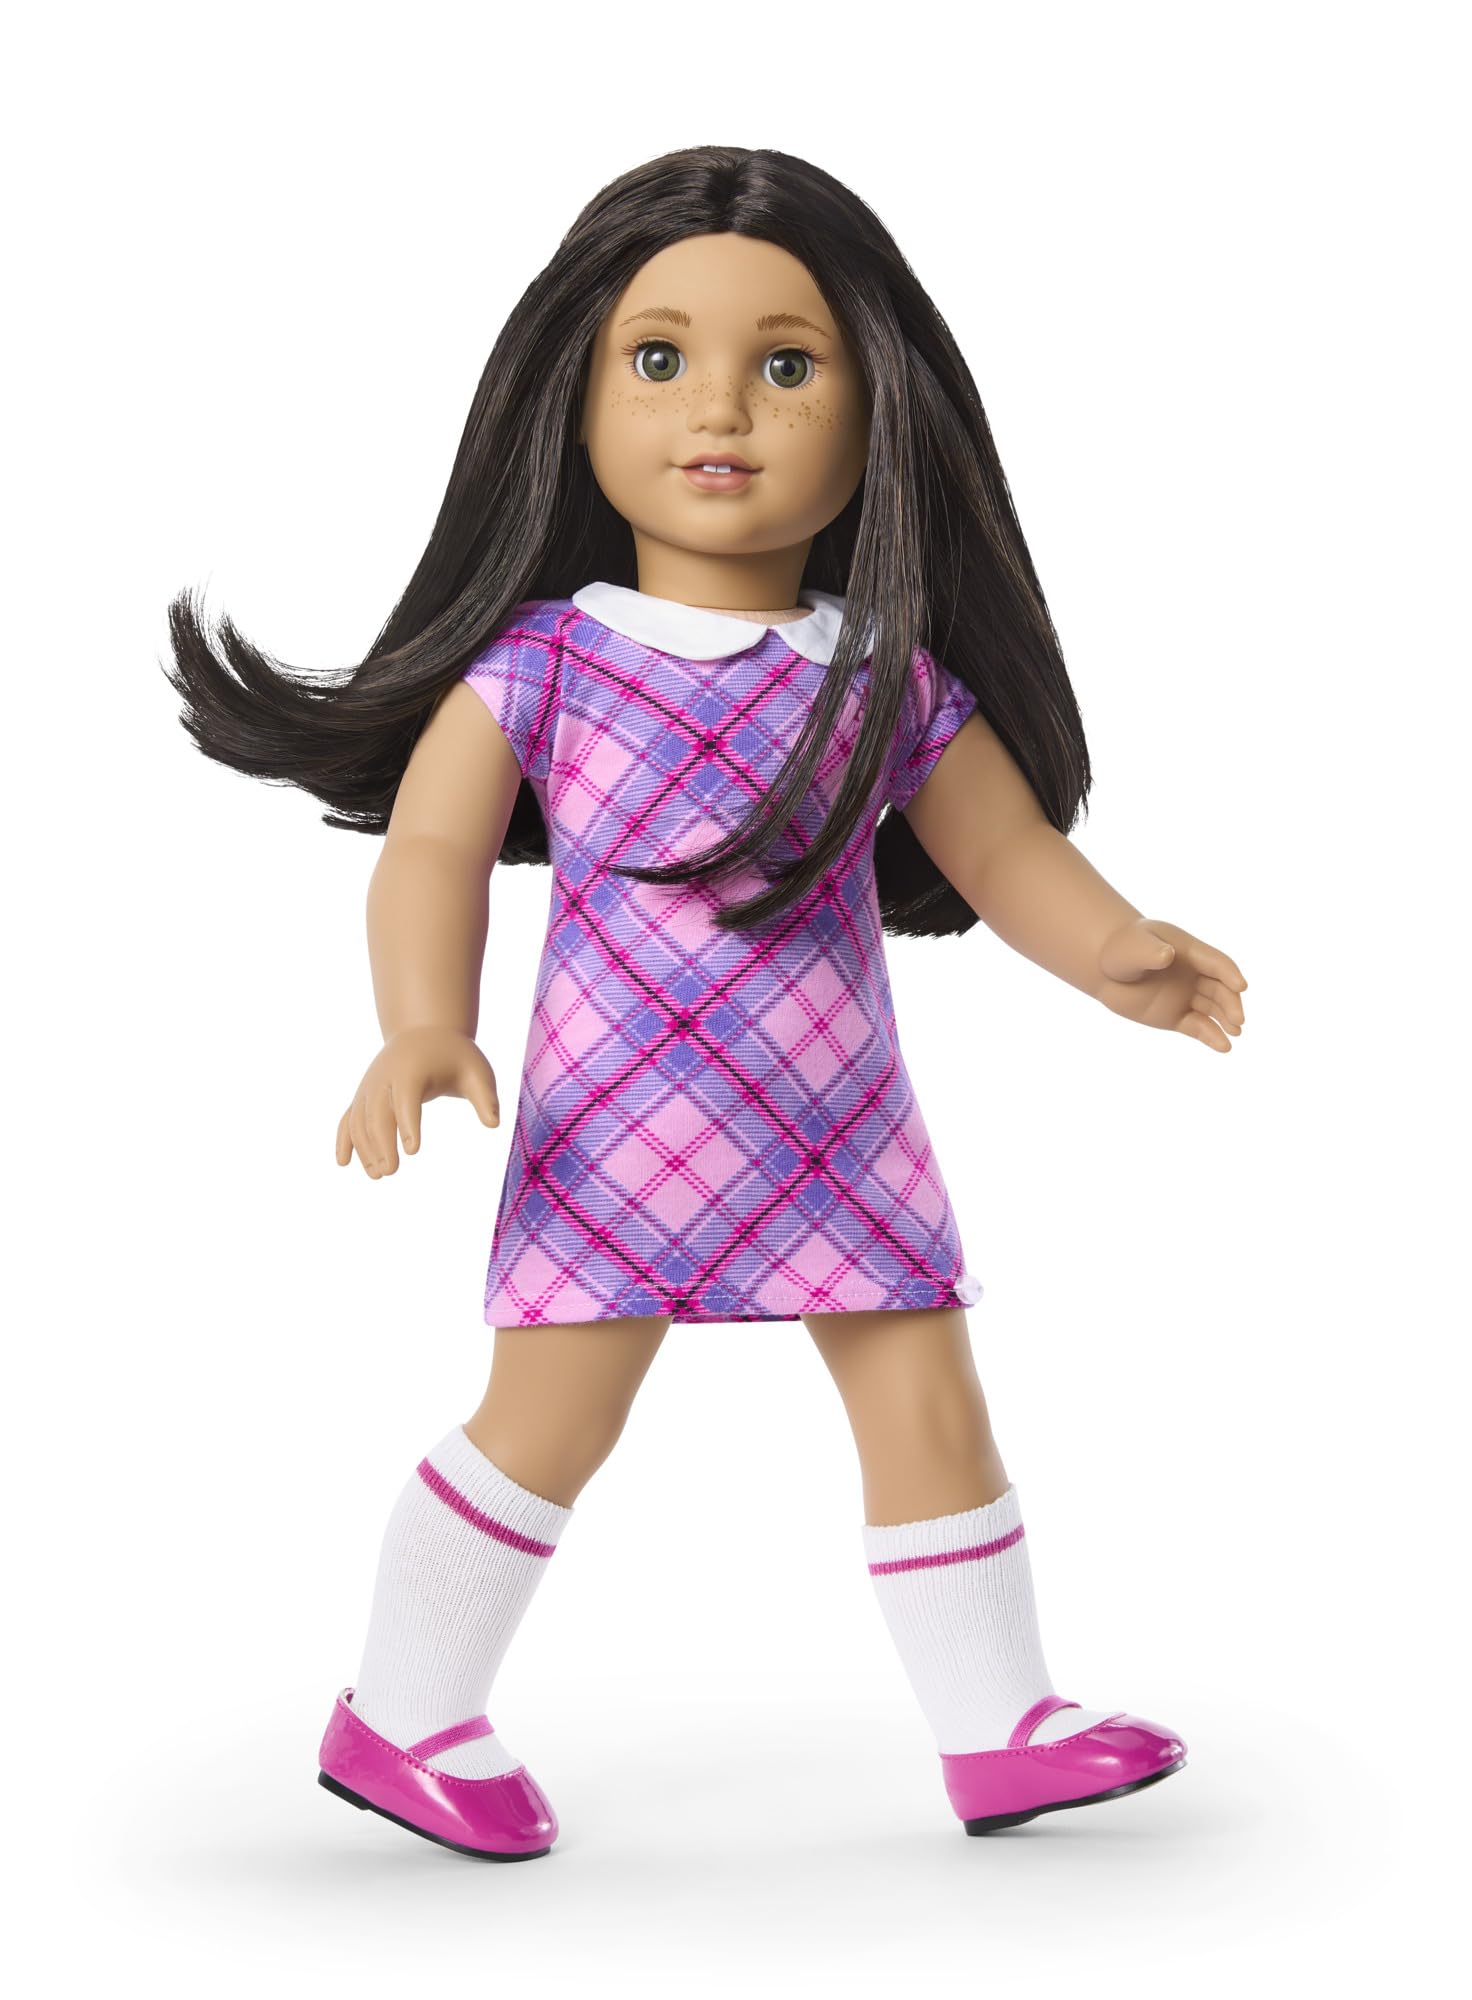 American Girl Truly Me 18-inch Doll #128 w/Green Eyes, Blk-Br Hair, Lt-to-Med Skin & Warm Undertones + Freckles, for Ages 6+